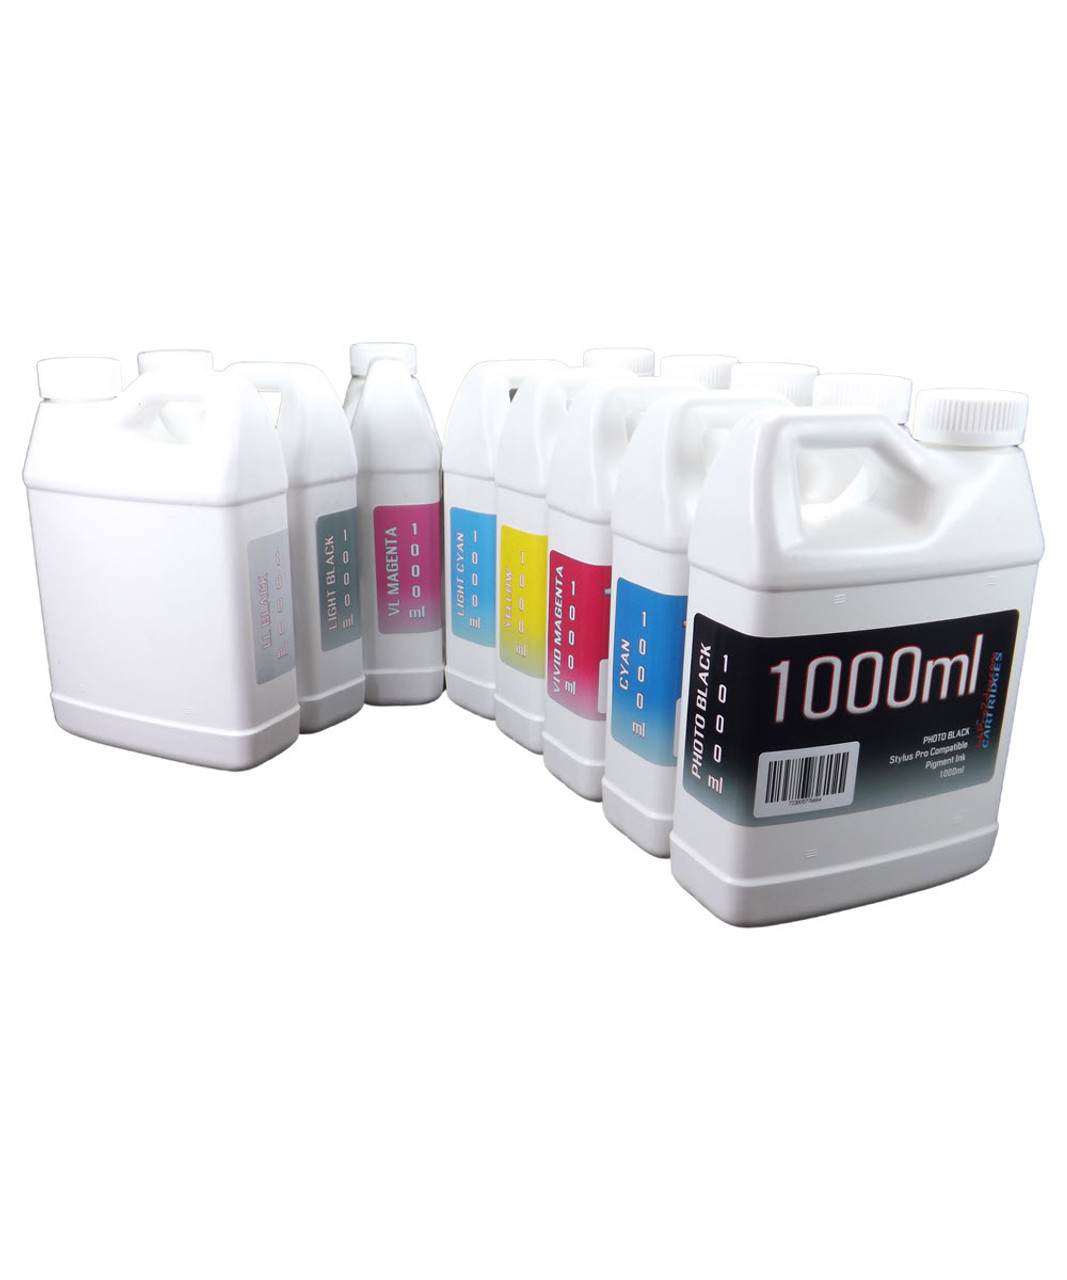 8- 1000ml Bottles Compatible UltraChrome K3 Pigment Ink for Epson Stylus Pro 7800 9800 Printers